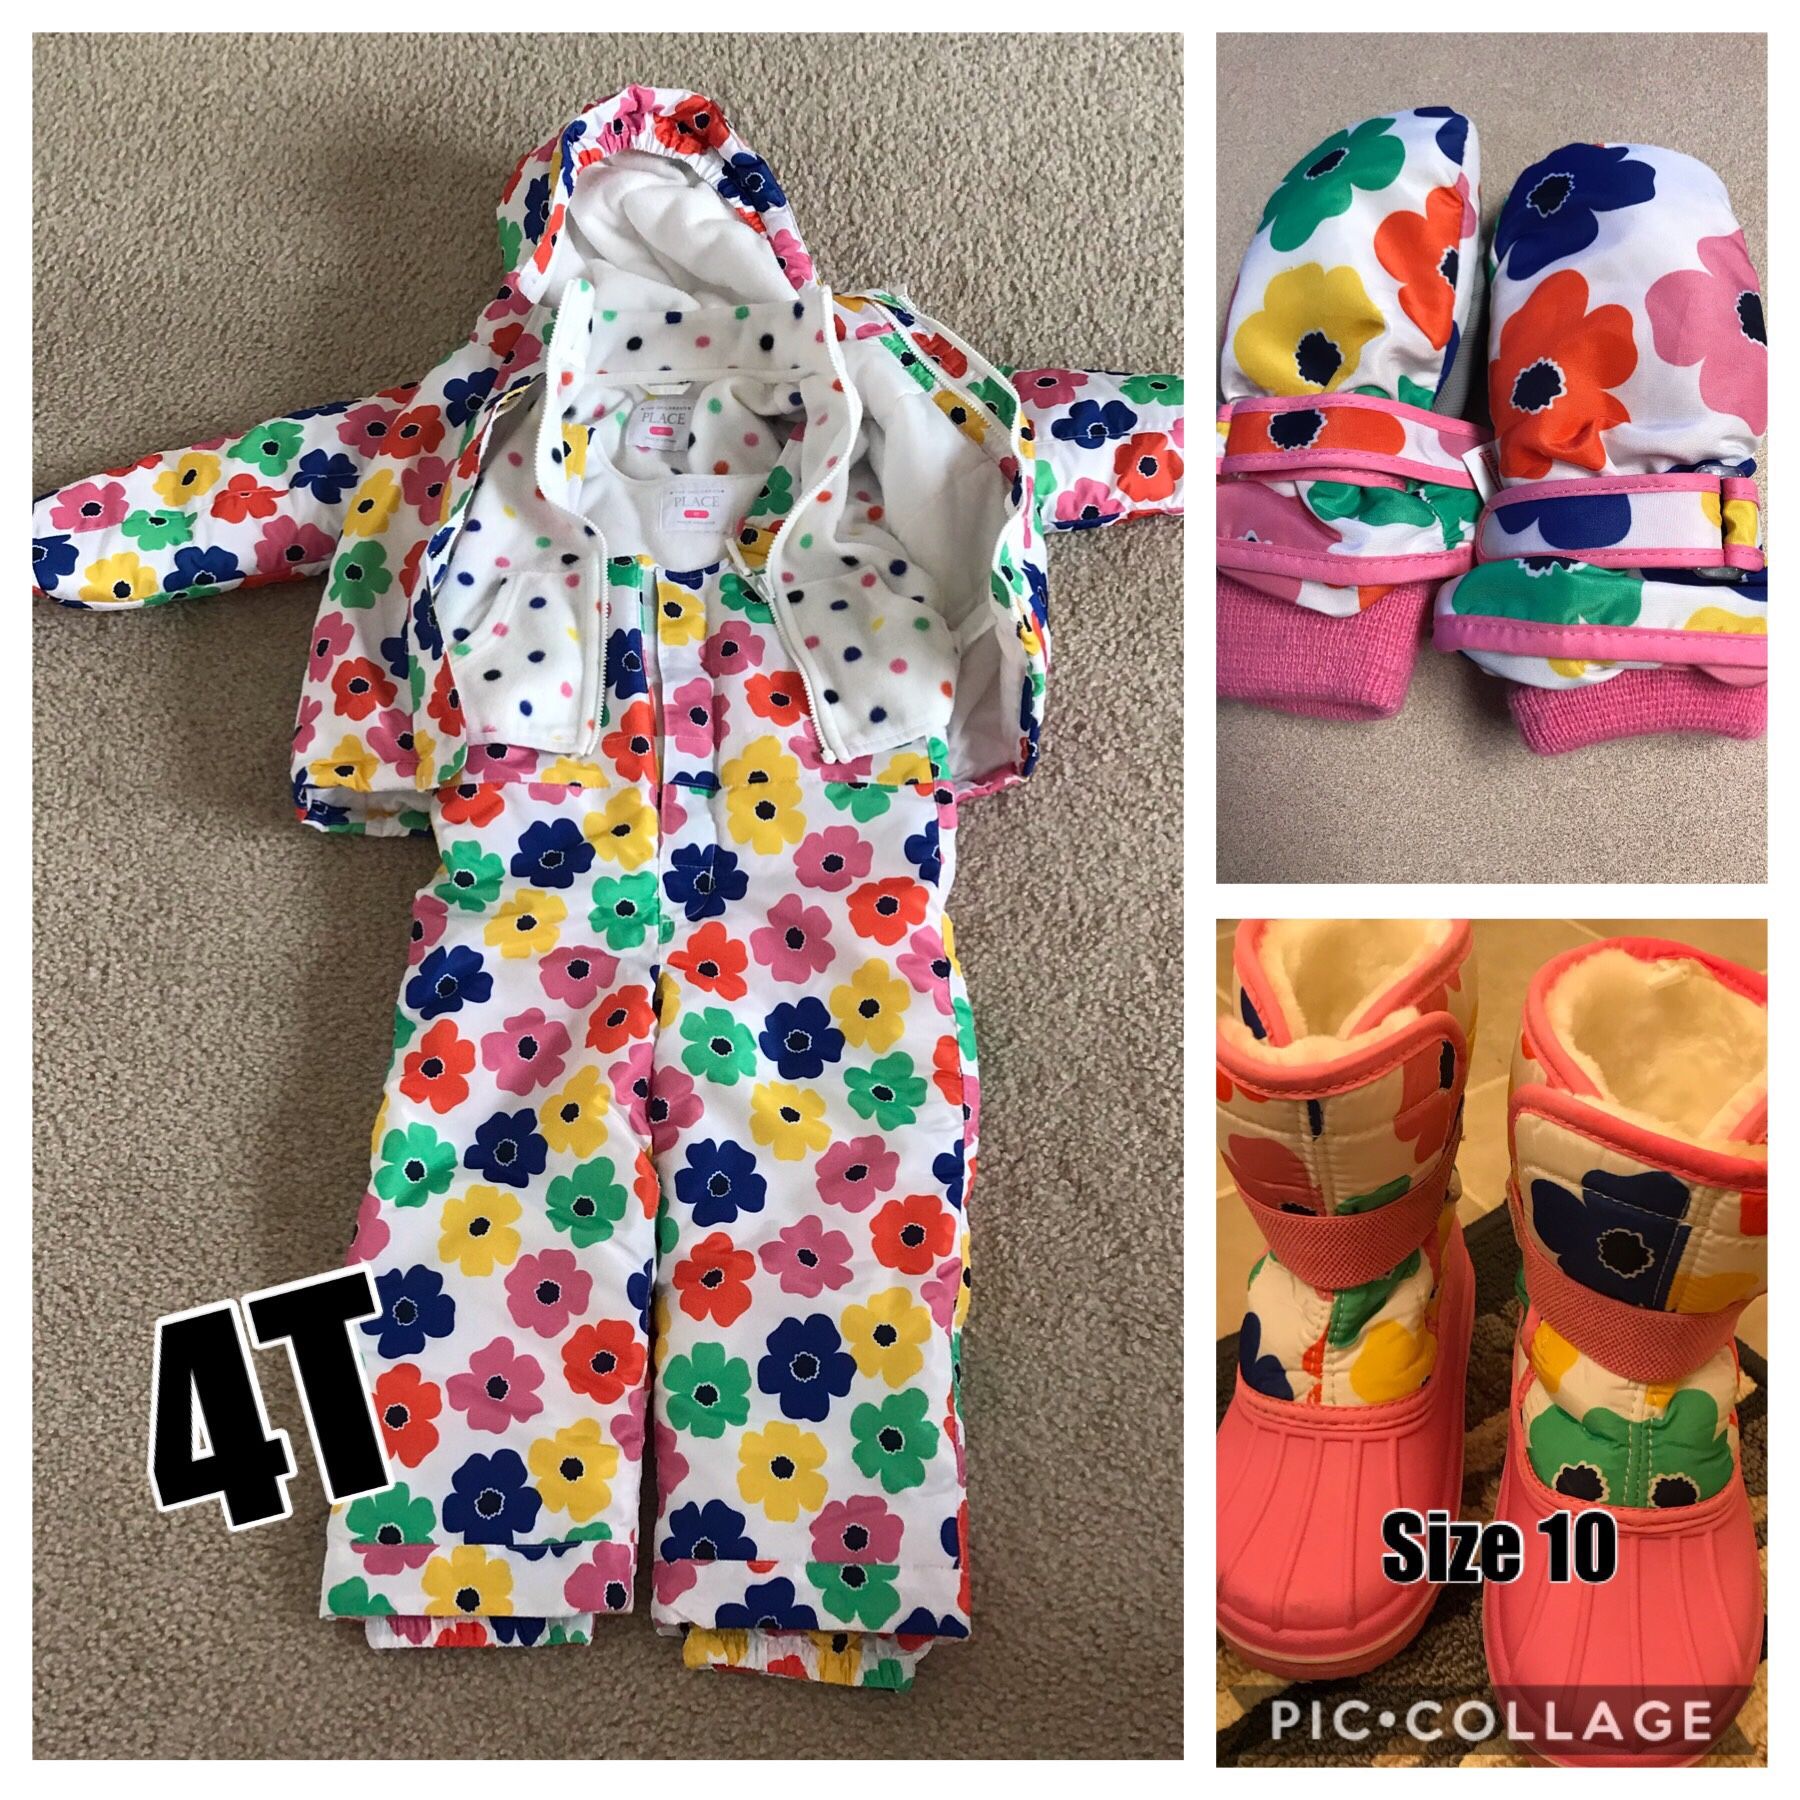 Complete Snow Suit Set with Snow boots